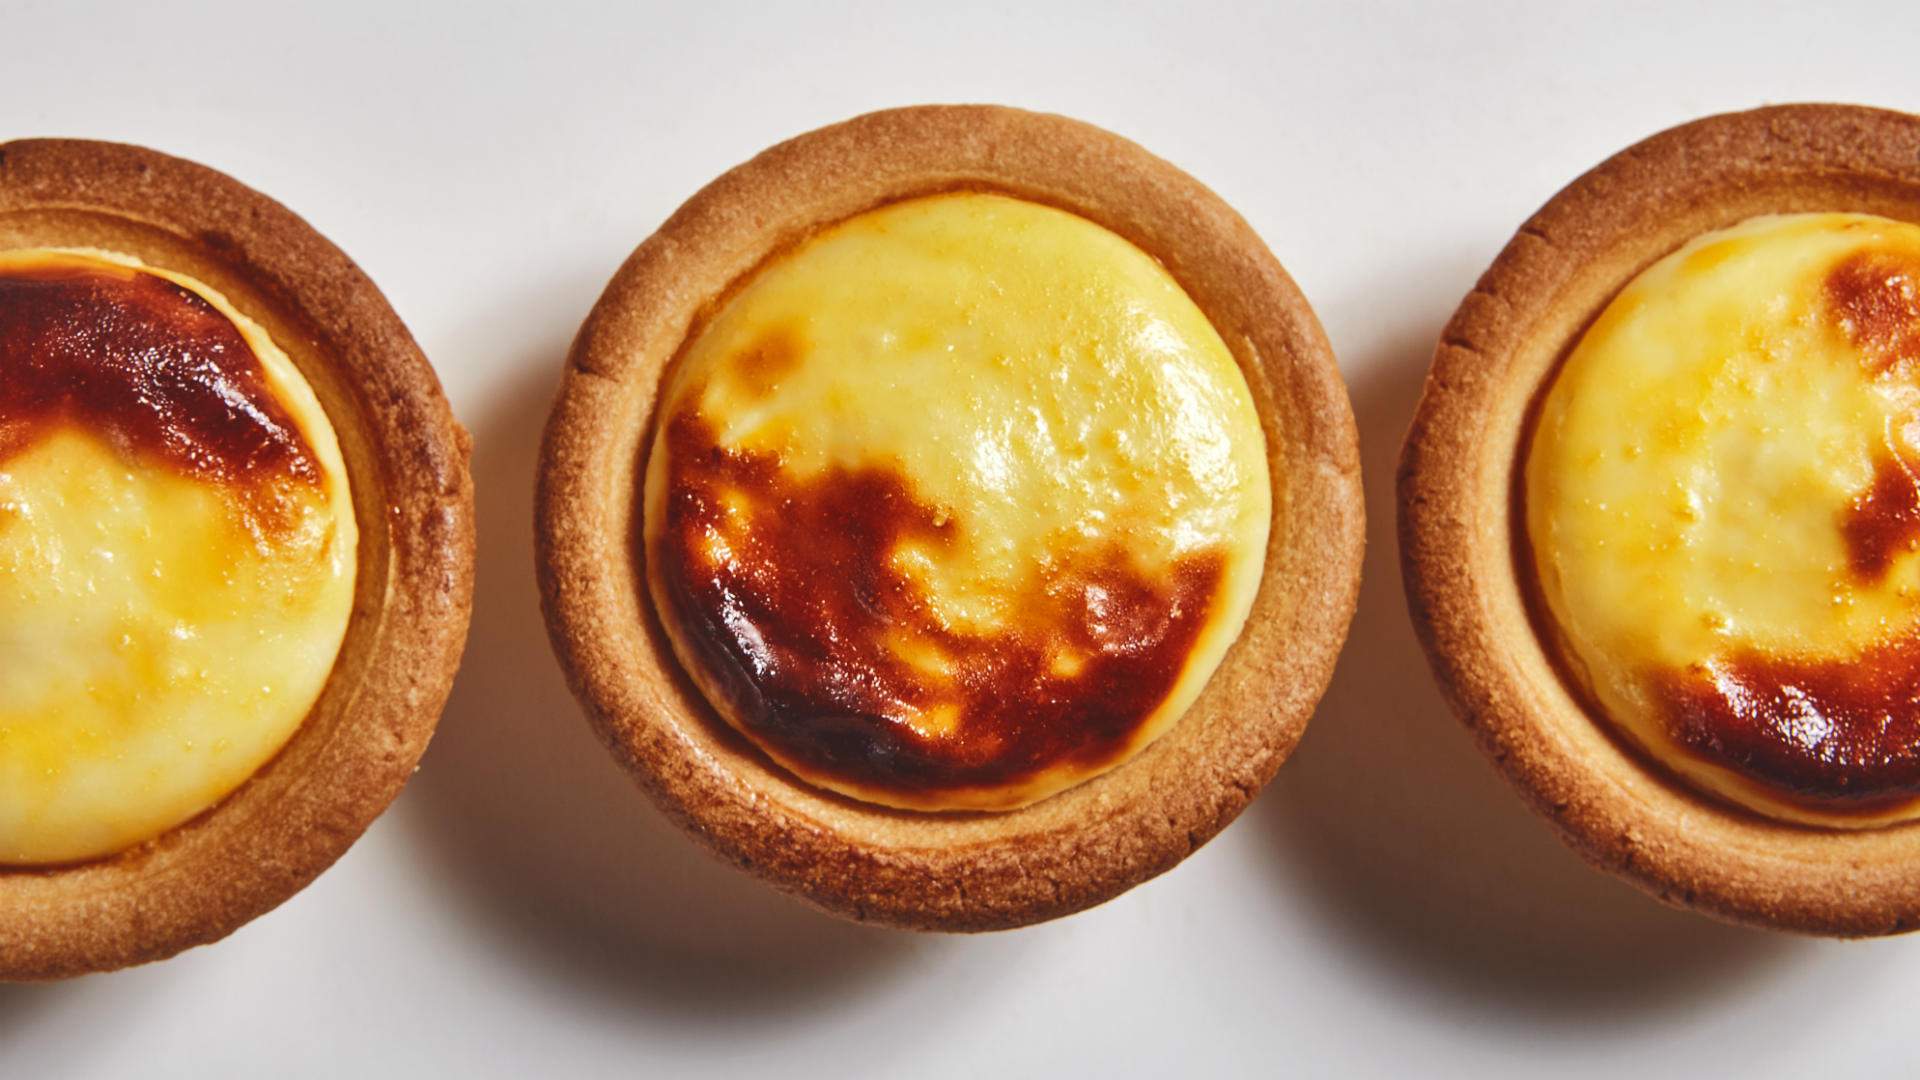 Malaysia's Insanely Popular Baked Three-Cheese Tarts Arrive In Brisbane Next Week